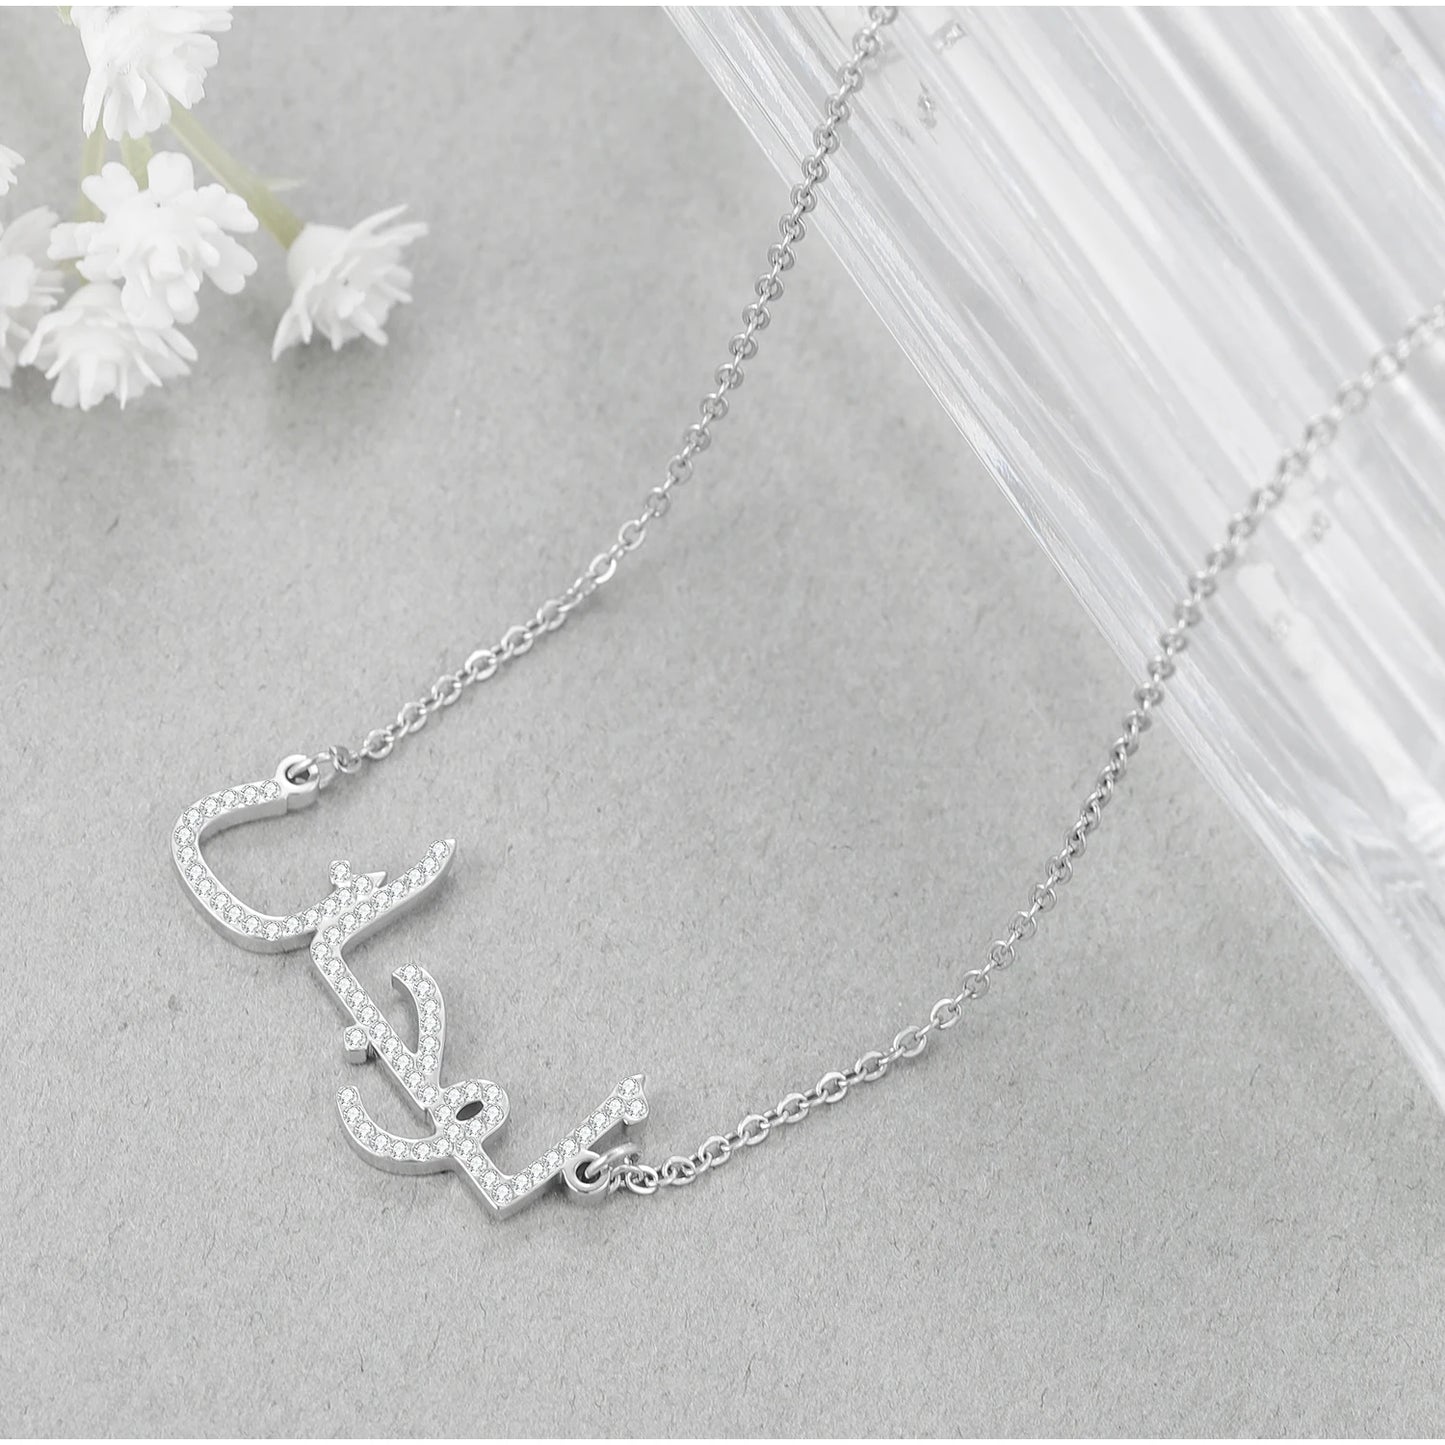 Custom Arabic Name Necklace Personalized Stainless Steel Crystal Arabic Pendant Iced Out Names Jewelry For Women Christmas Gift